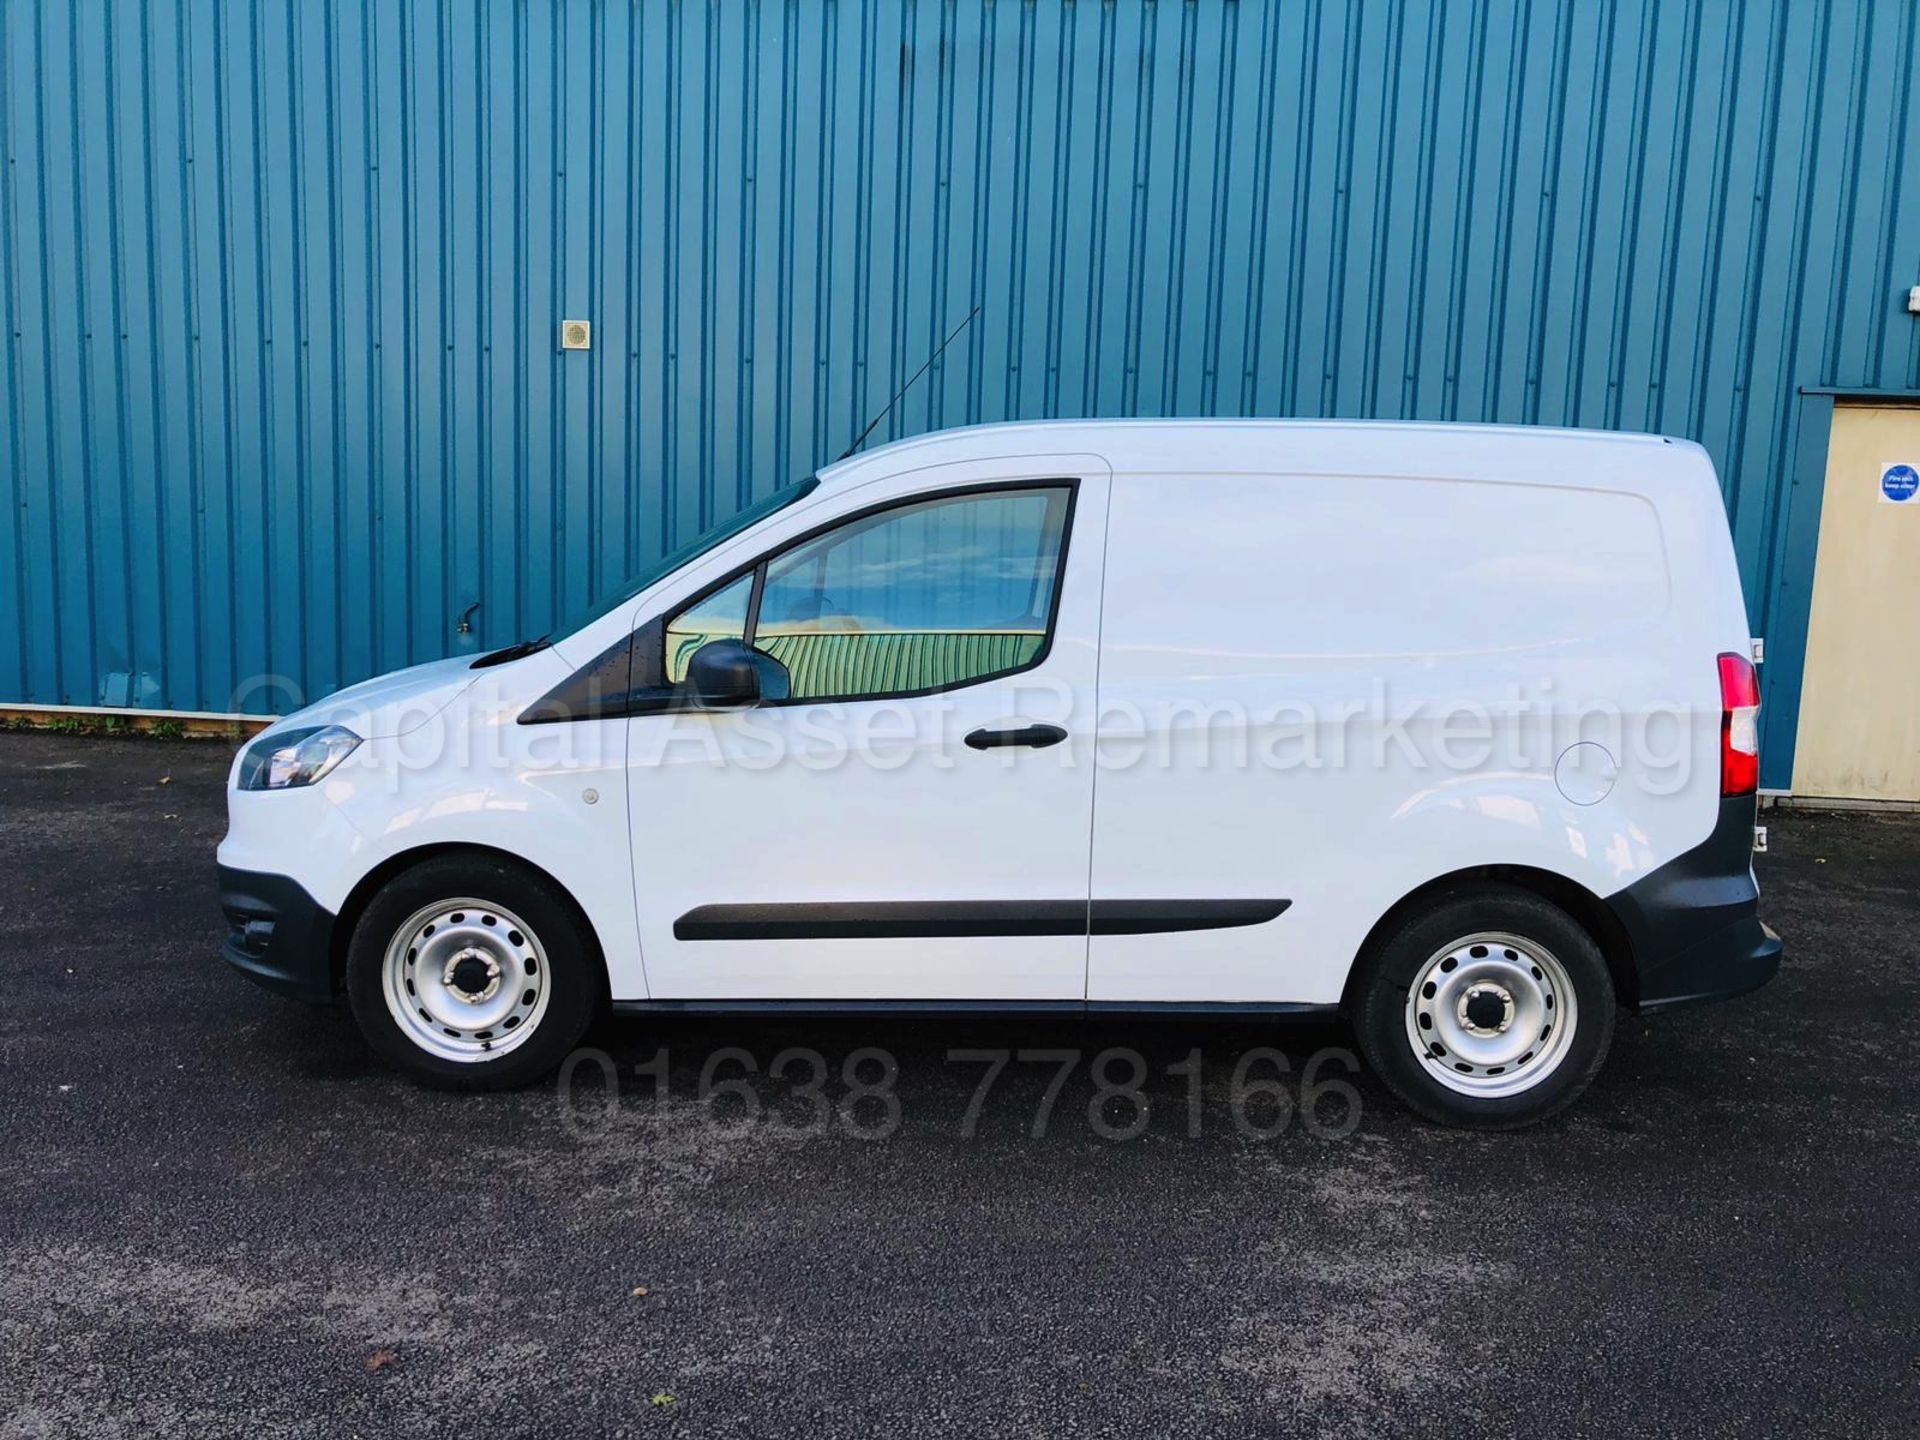 FORD TRANSIT COURIER 'PANEL VAN' *BASE EDITION* (2017) '1.5 TDCI - 75 BHP - 5 SPEED' (1 OWNER) - Image 2 of 25